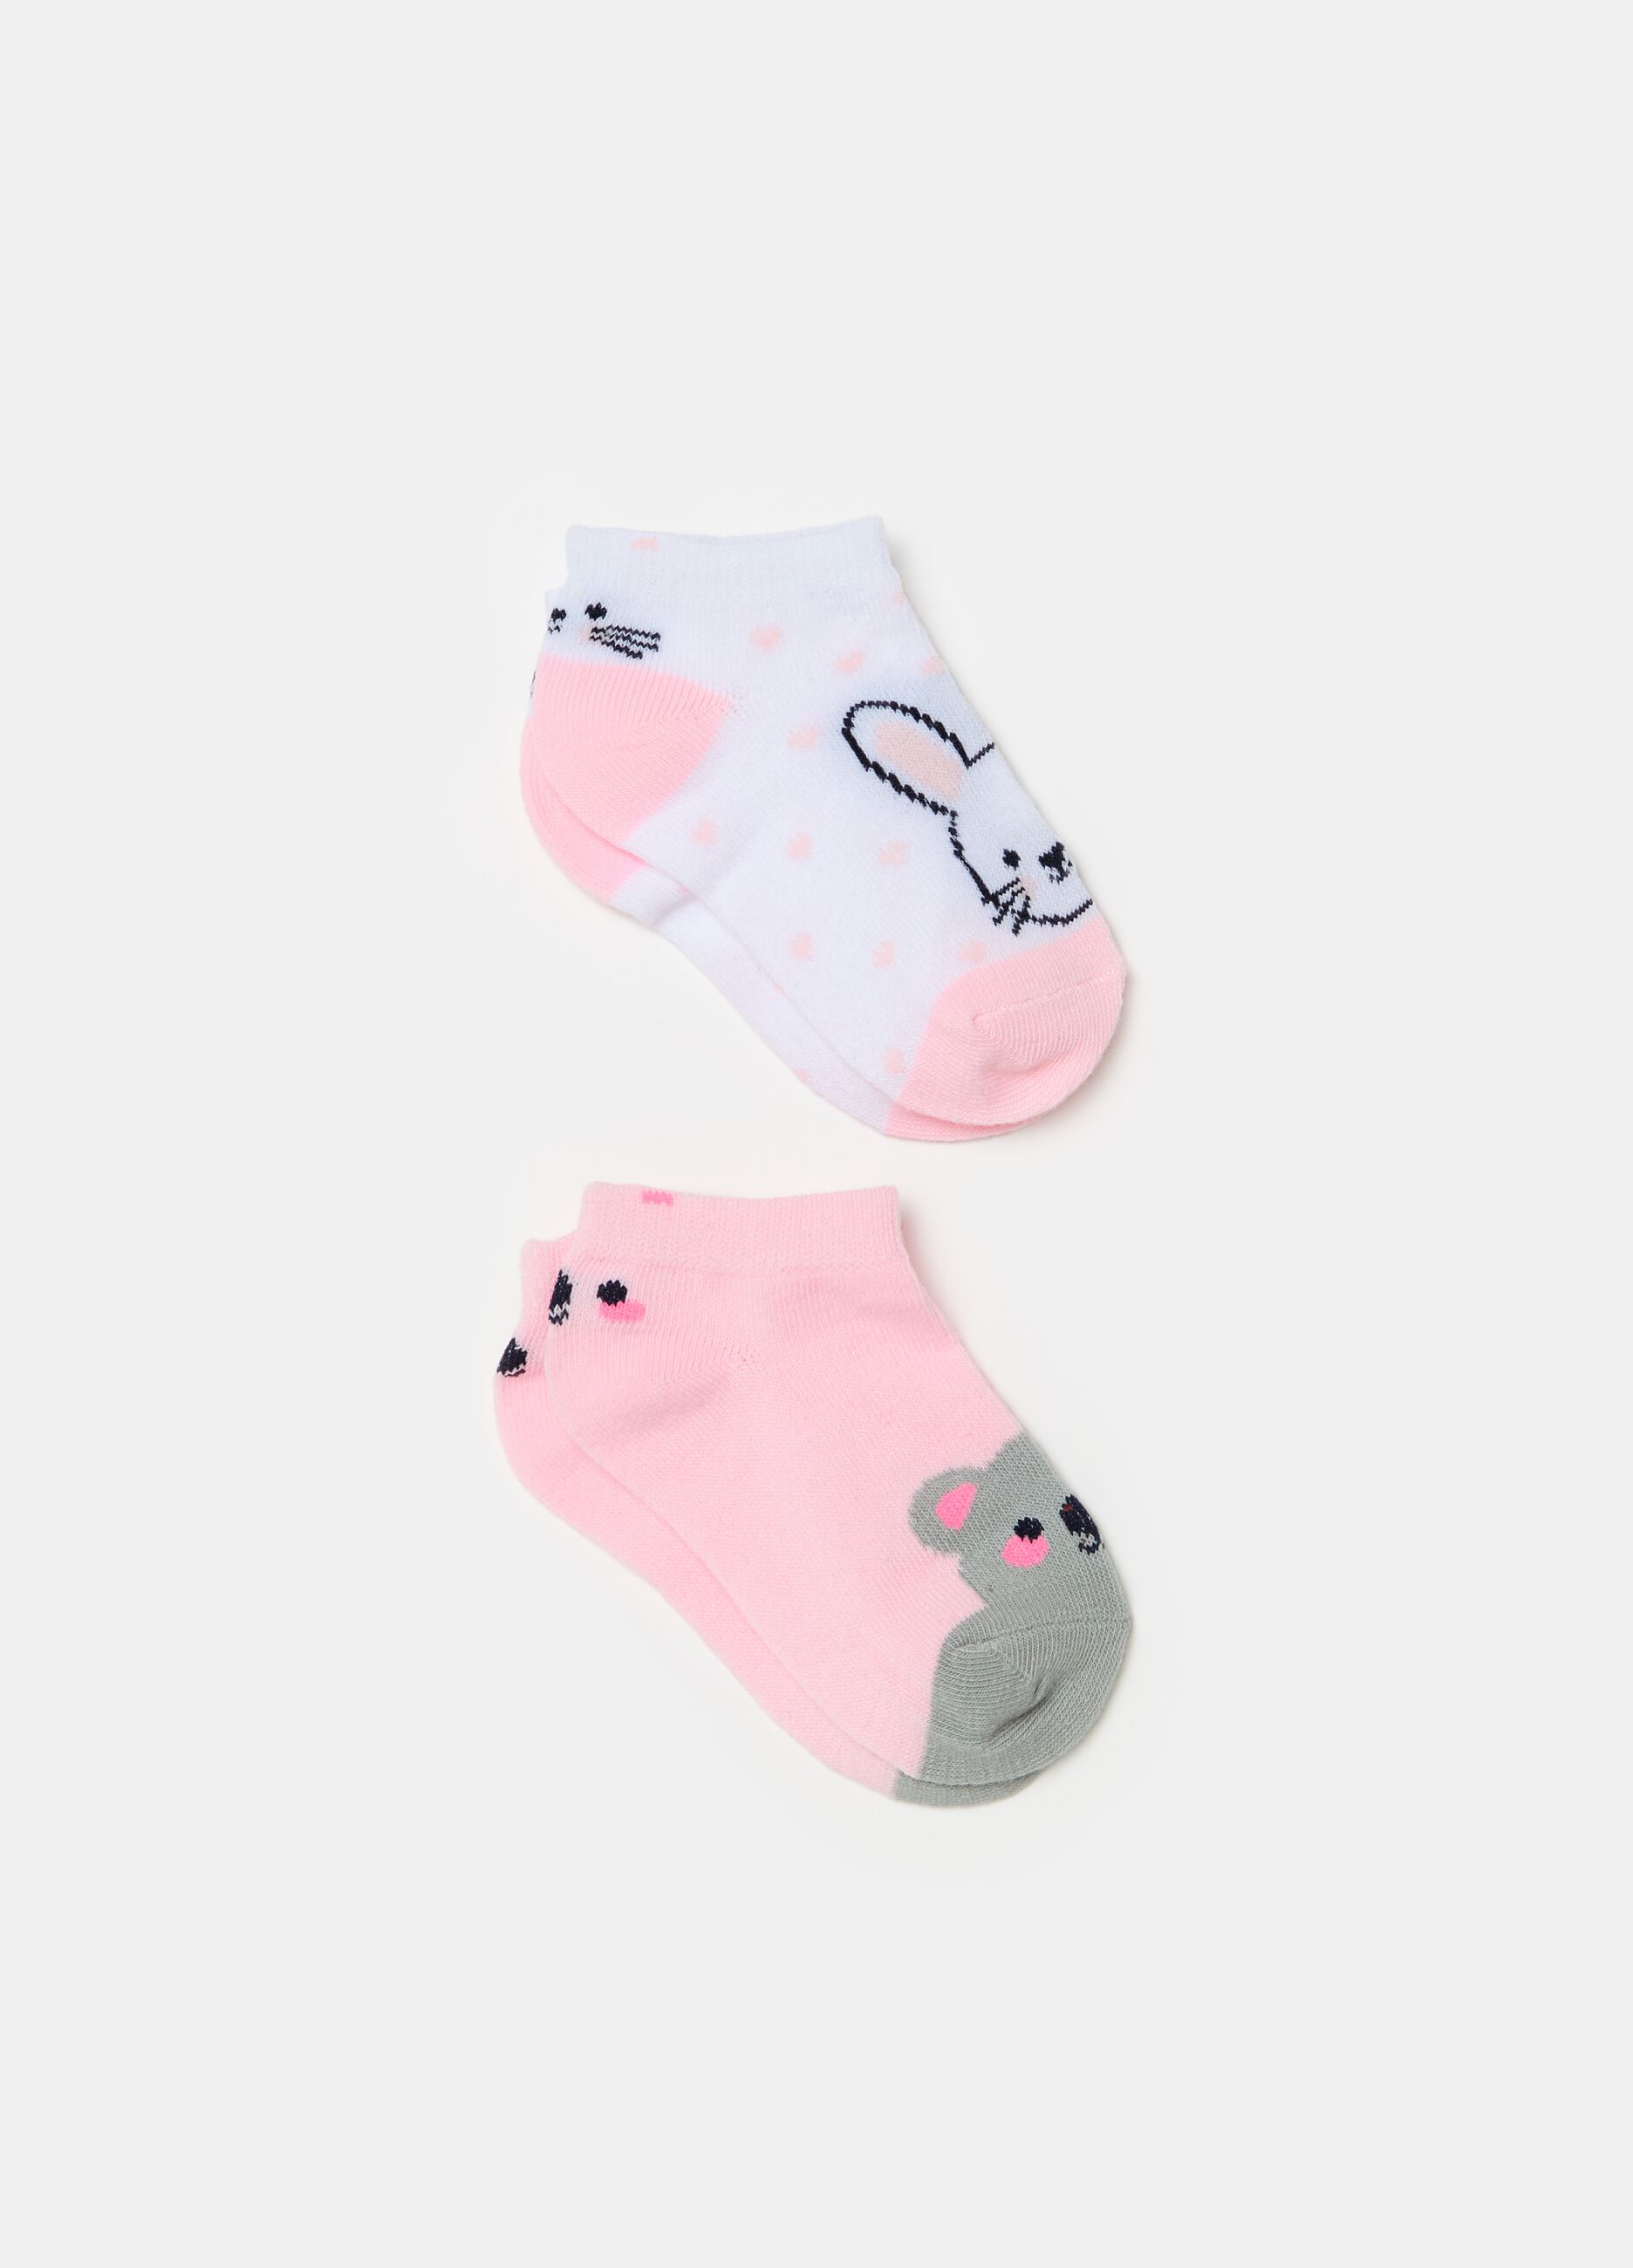 Two-pair pack shoe liners with animals design